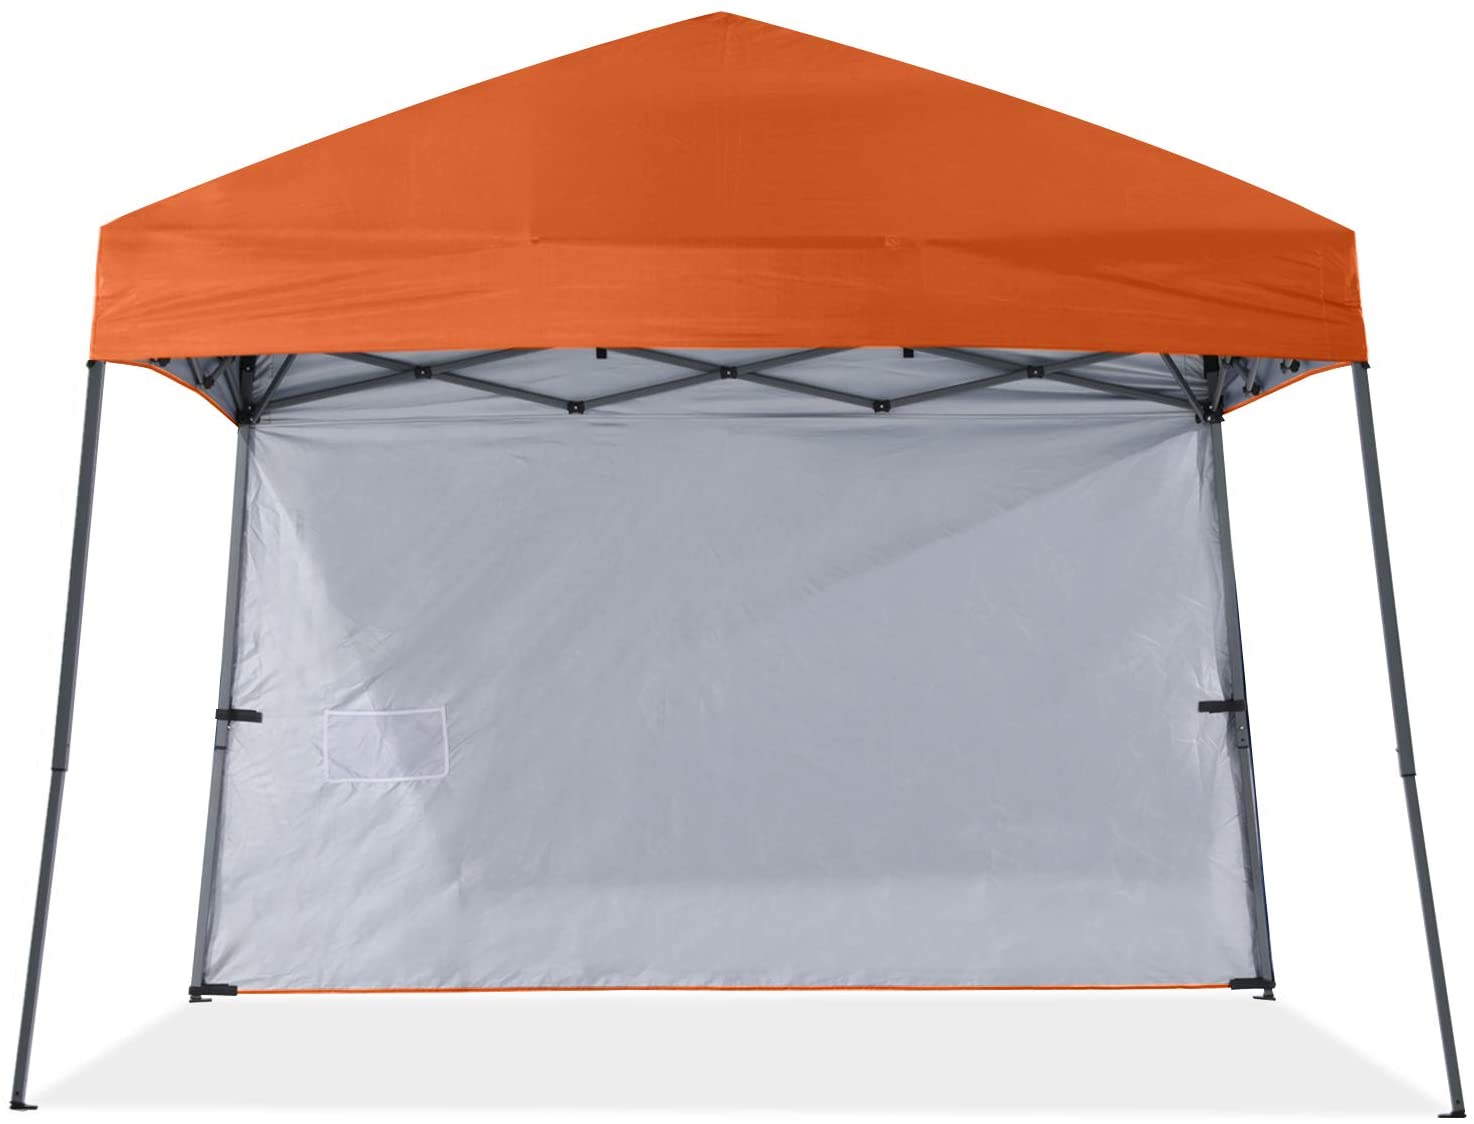 ABCCANOPY 8 ft x 8 ft Outdoor Pop up Slant Leg Canopy Tent with 1 Sun Wall and 1 Backpack Bag - Orange